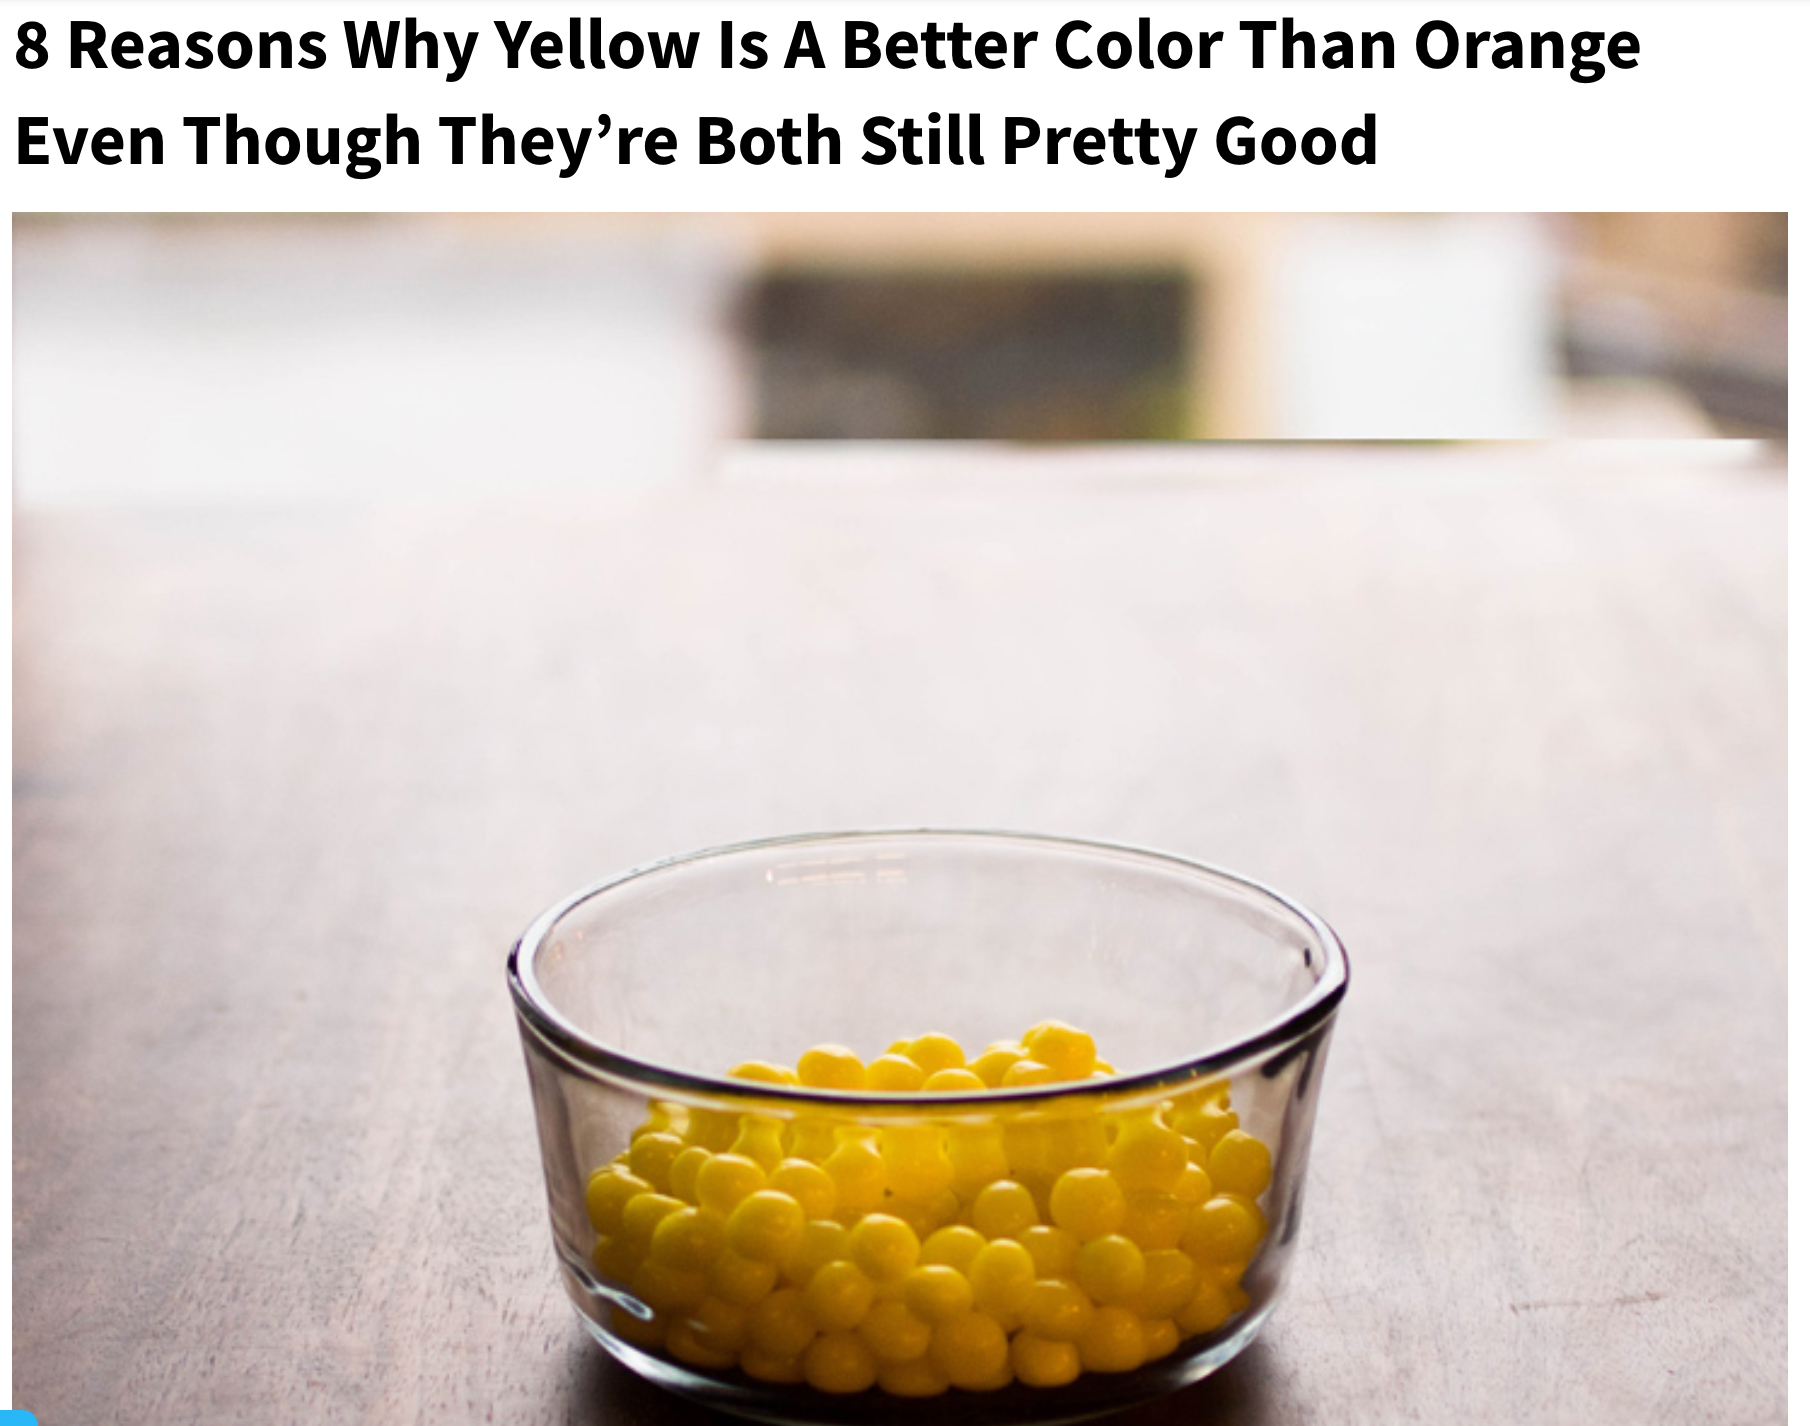 clickhole headlines - 8 Reasons Why Yellow Is A Better Color Than Orange Even though They're Both Still Pretty Good